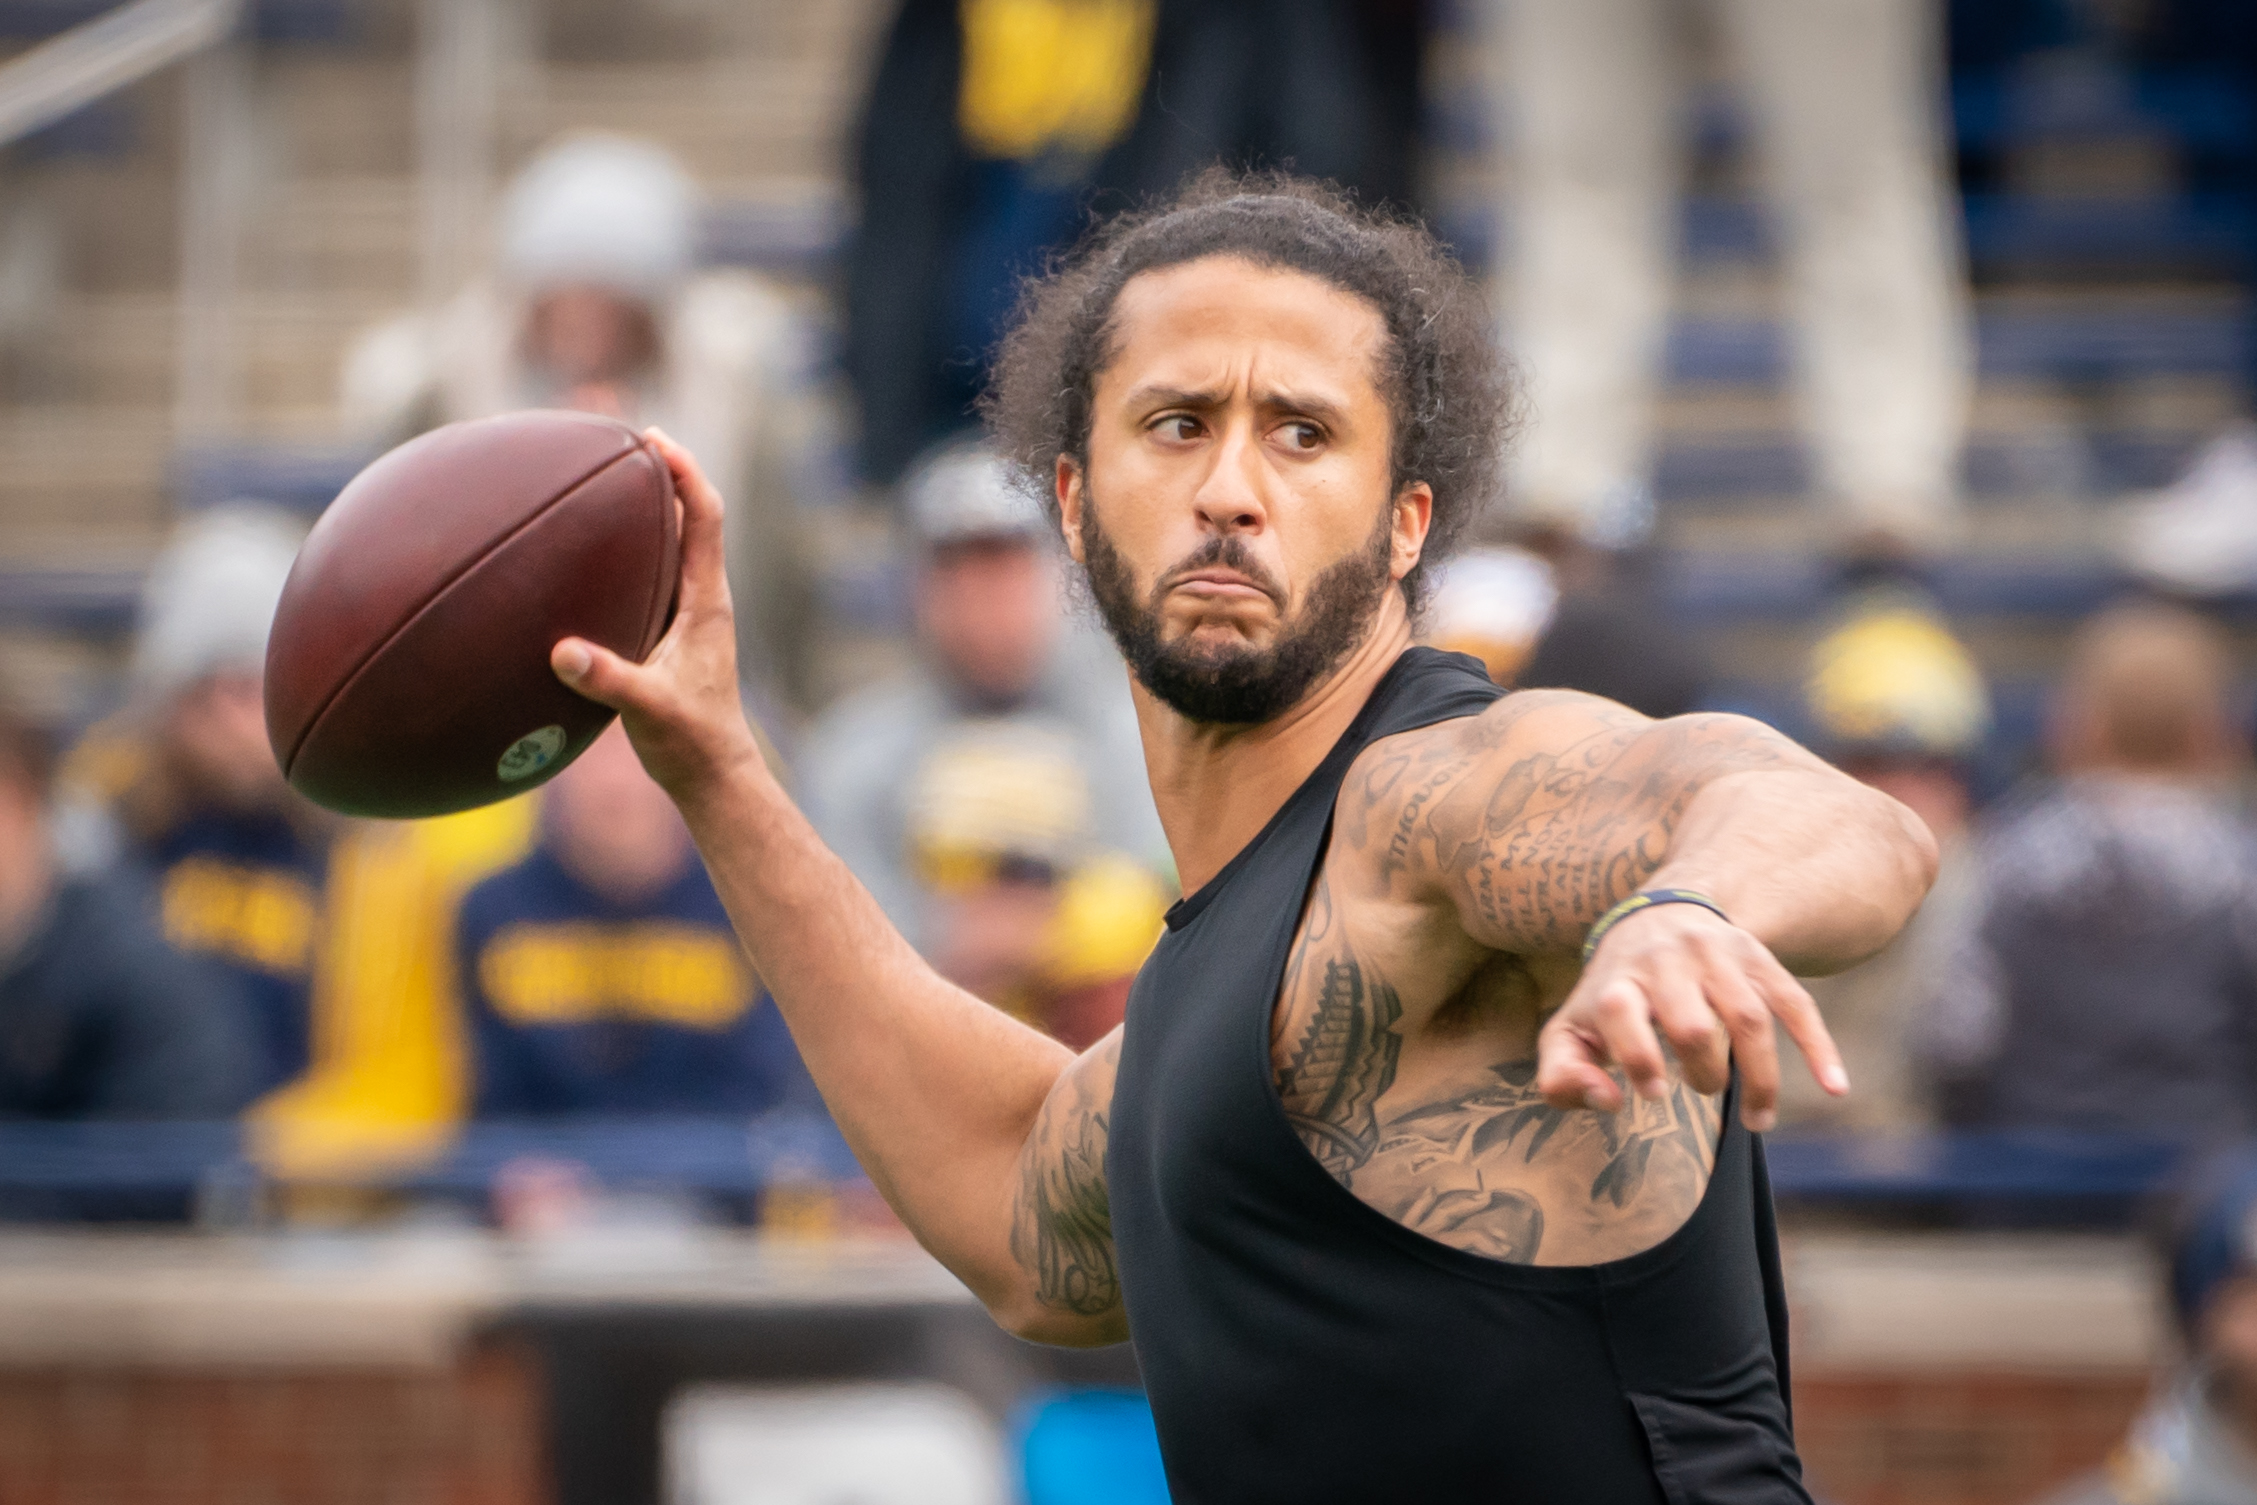 It turns out the Cleveland Browns wanted to sign Colin Kaepernick